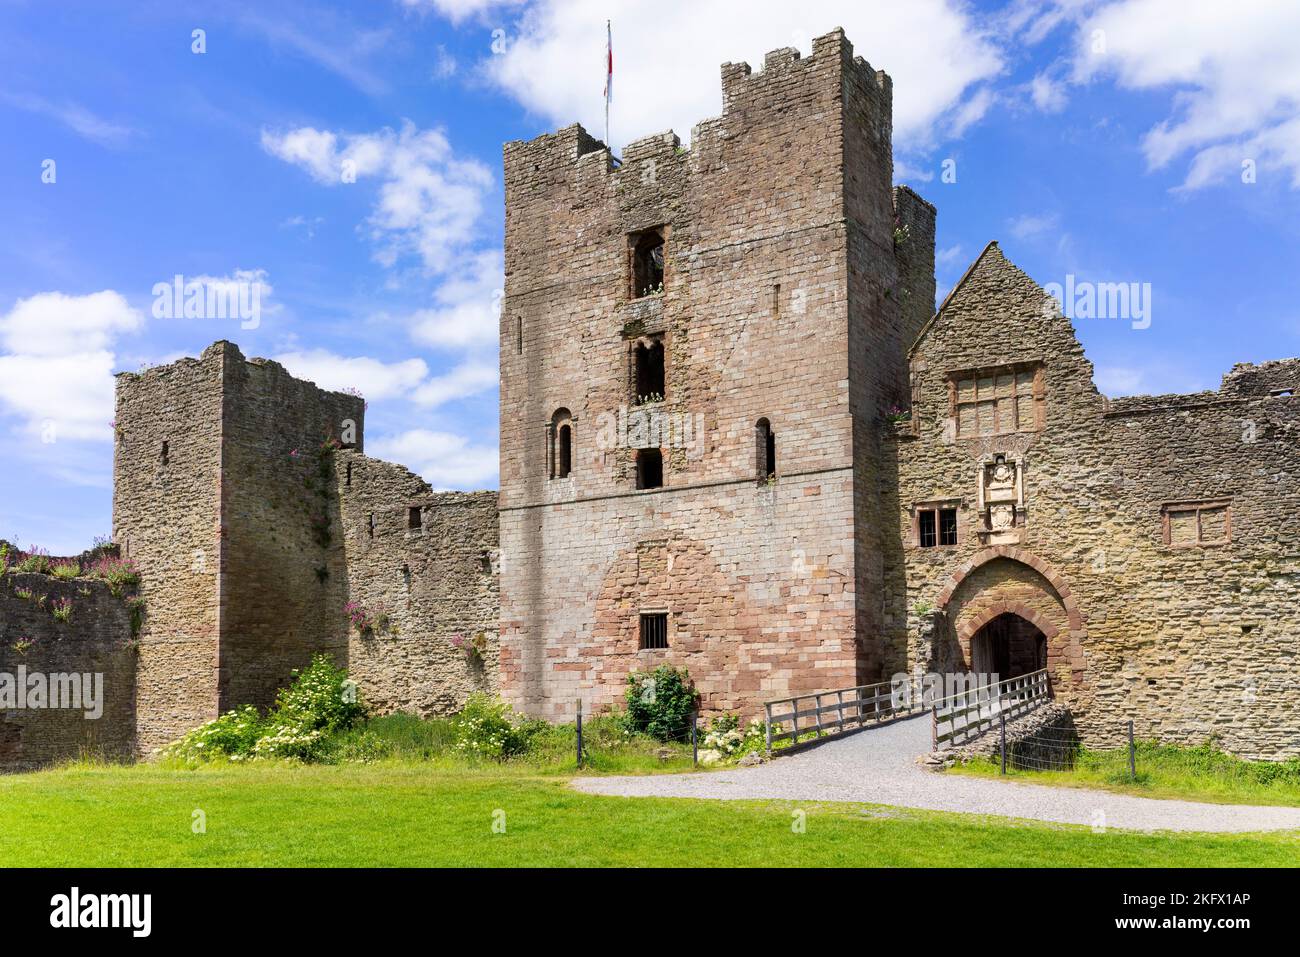 Ludlow Shropshire Ludlow Castle Great Hall Ludlow Castle Ludlow Shropshire England GB Europa Stockfoto